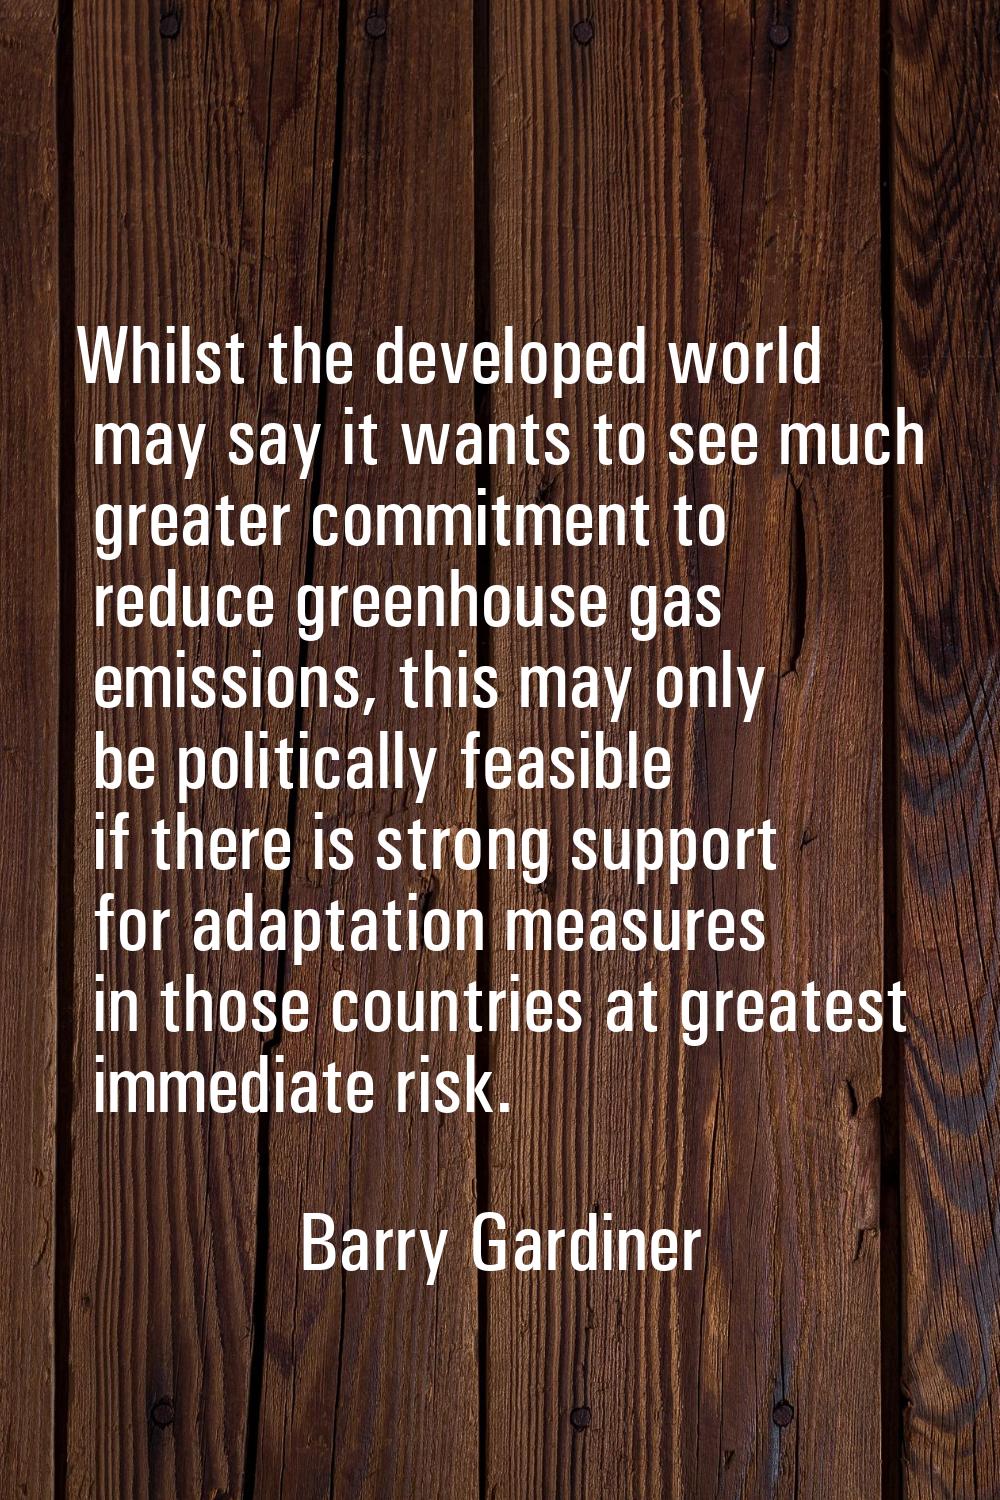 Whilst the developed world may say it wants to see much greater commitment to reduce greenhouse gas